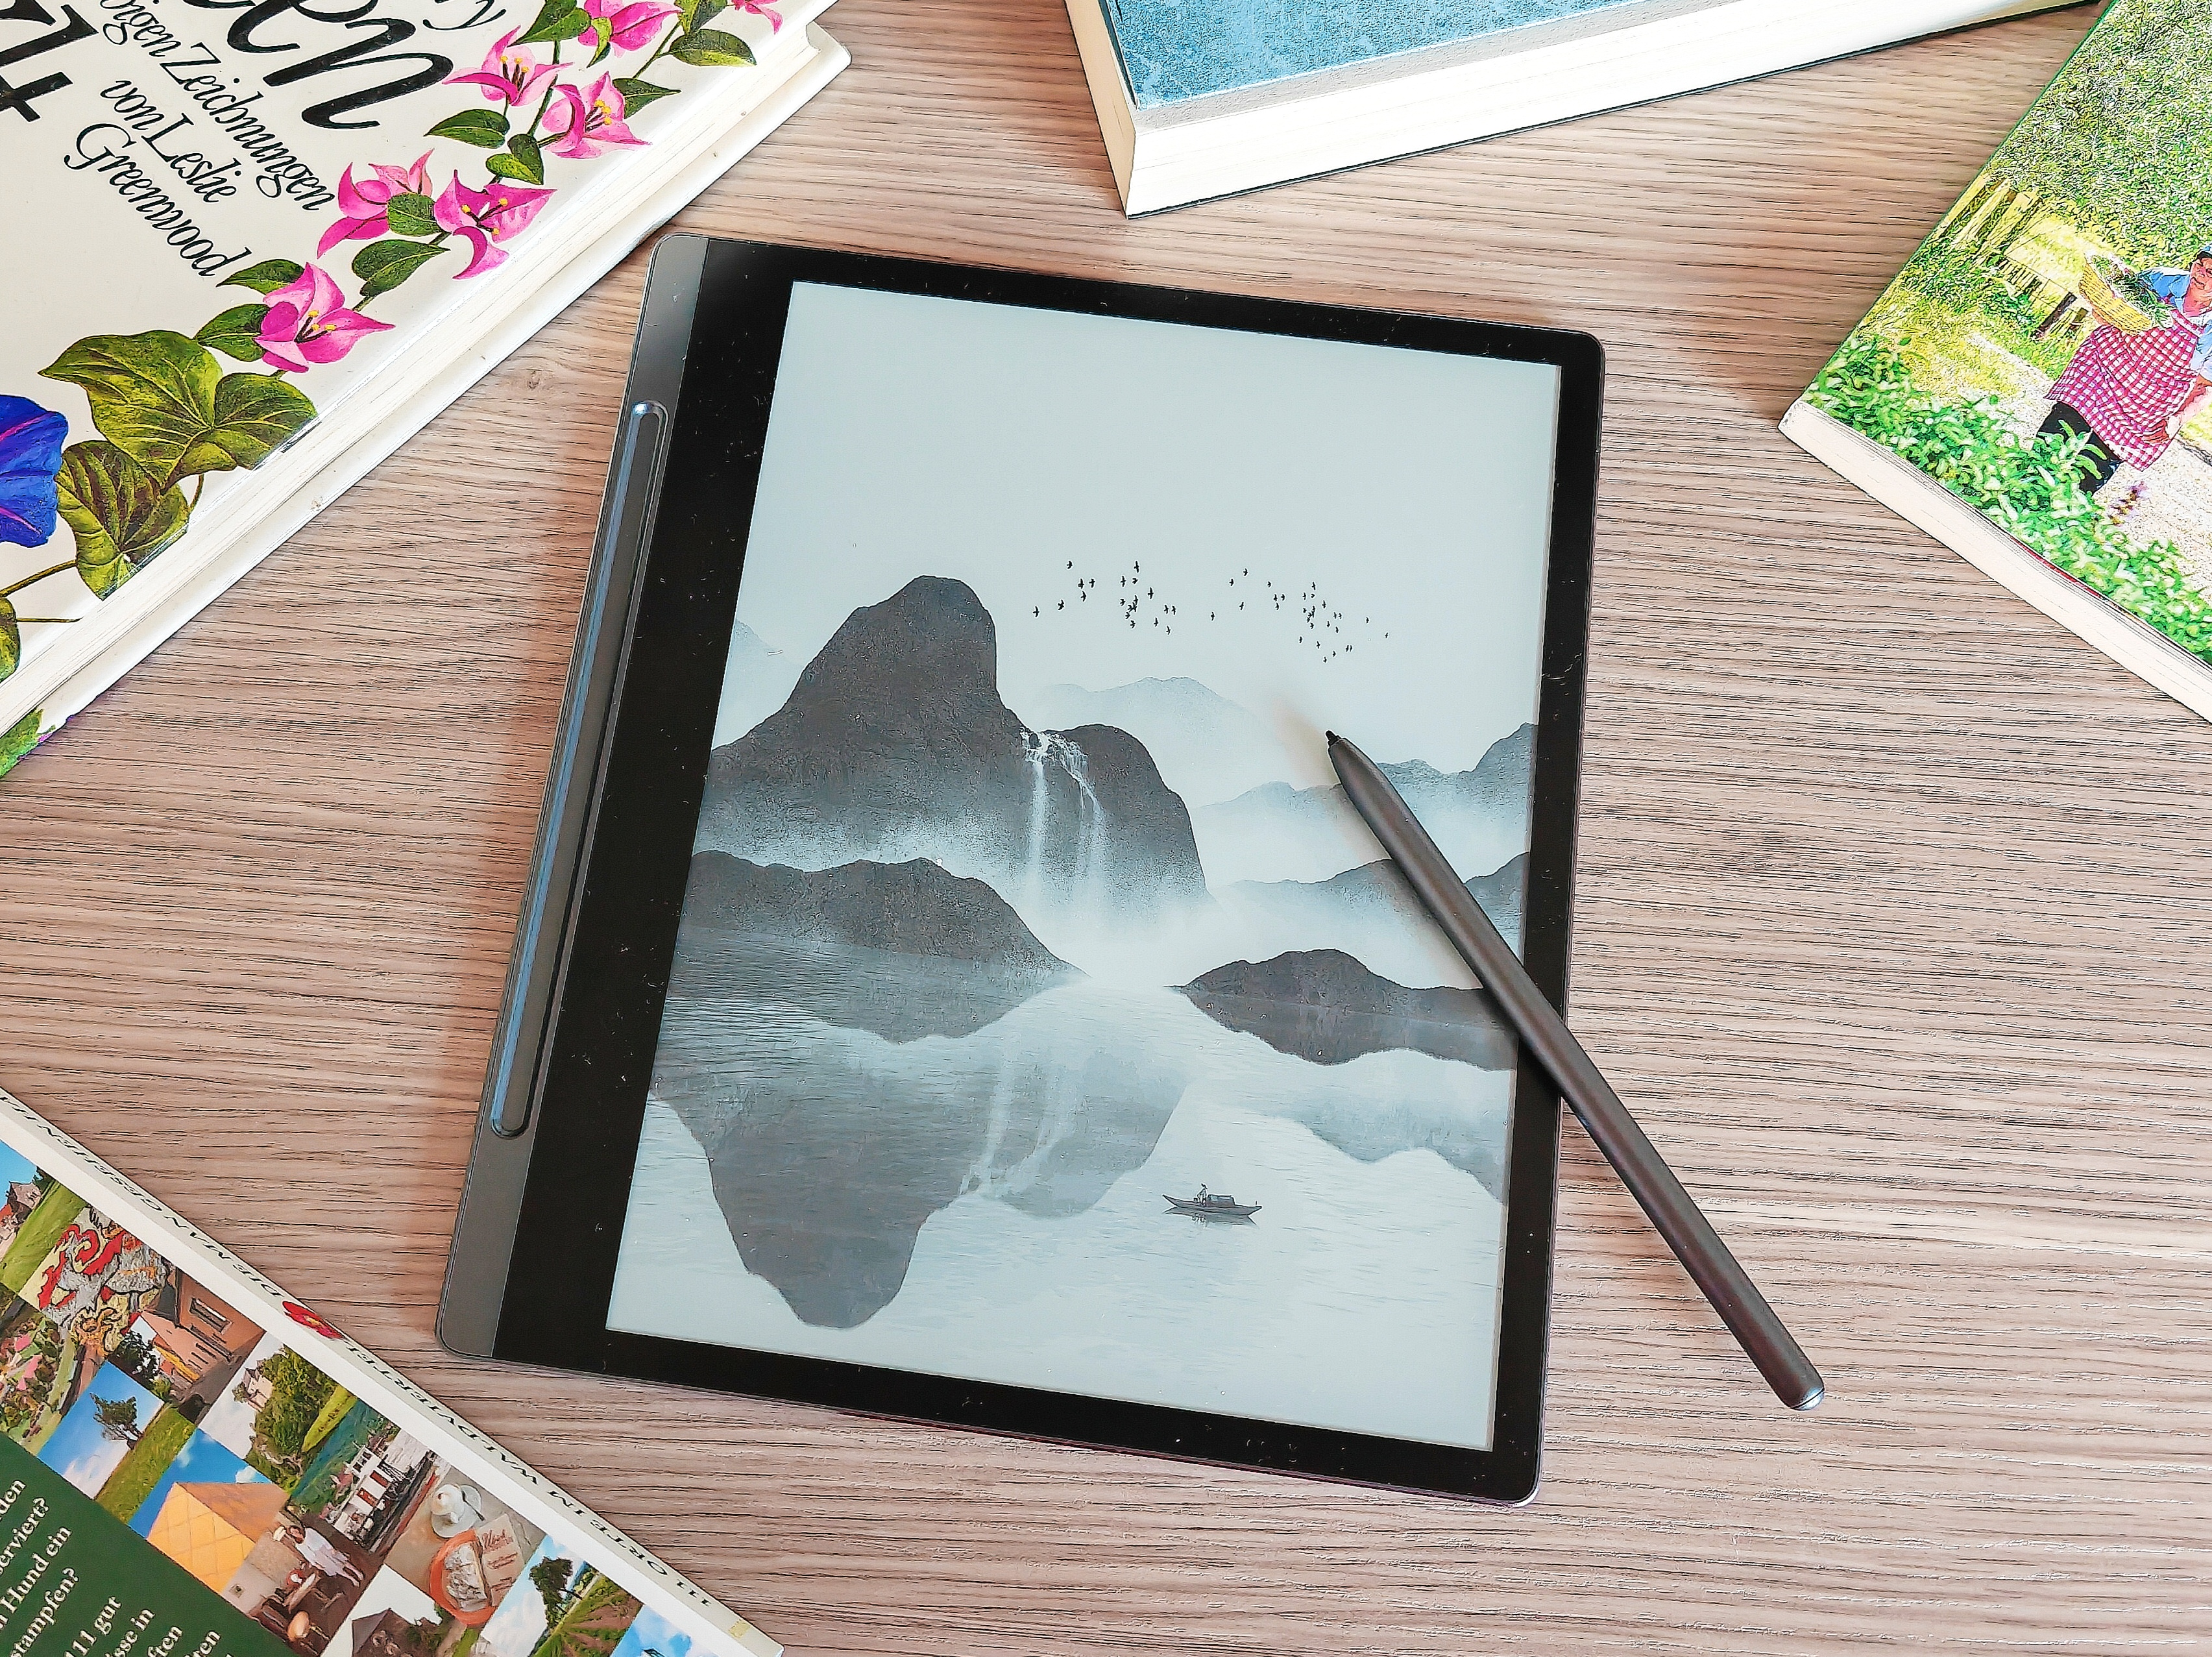 Lenovo Smart Paper review: A solid e-paper tablet